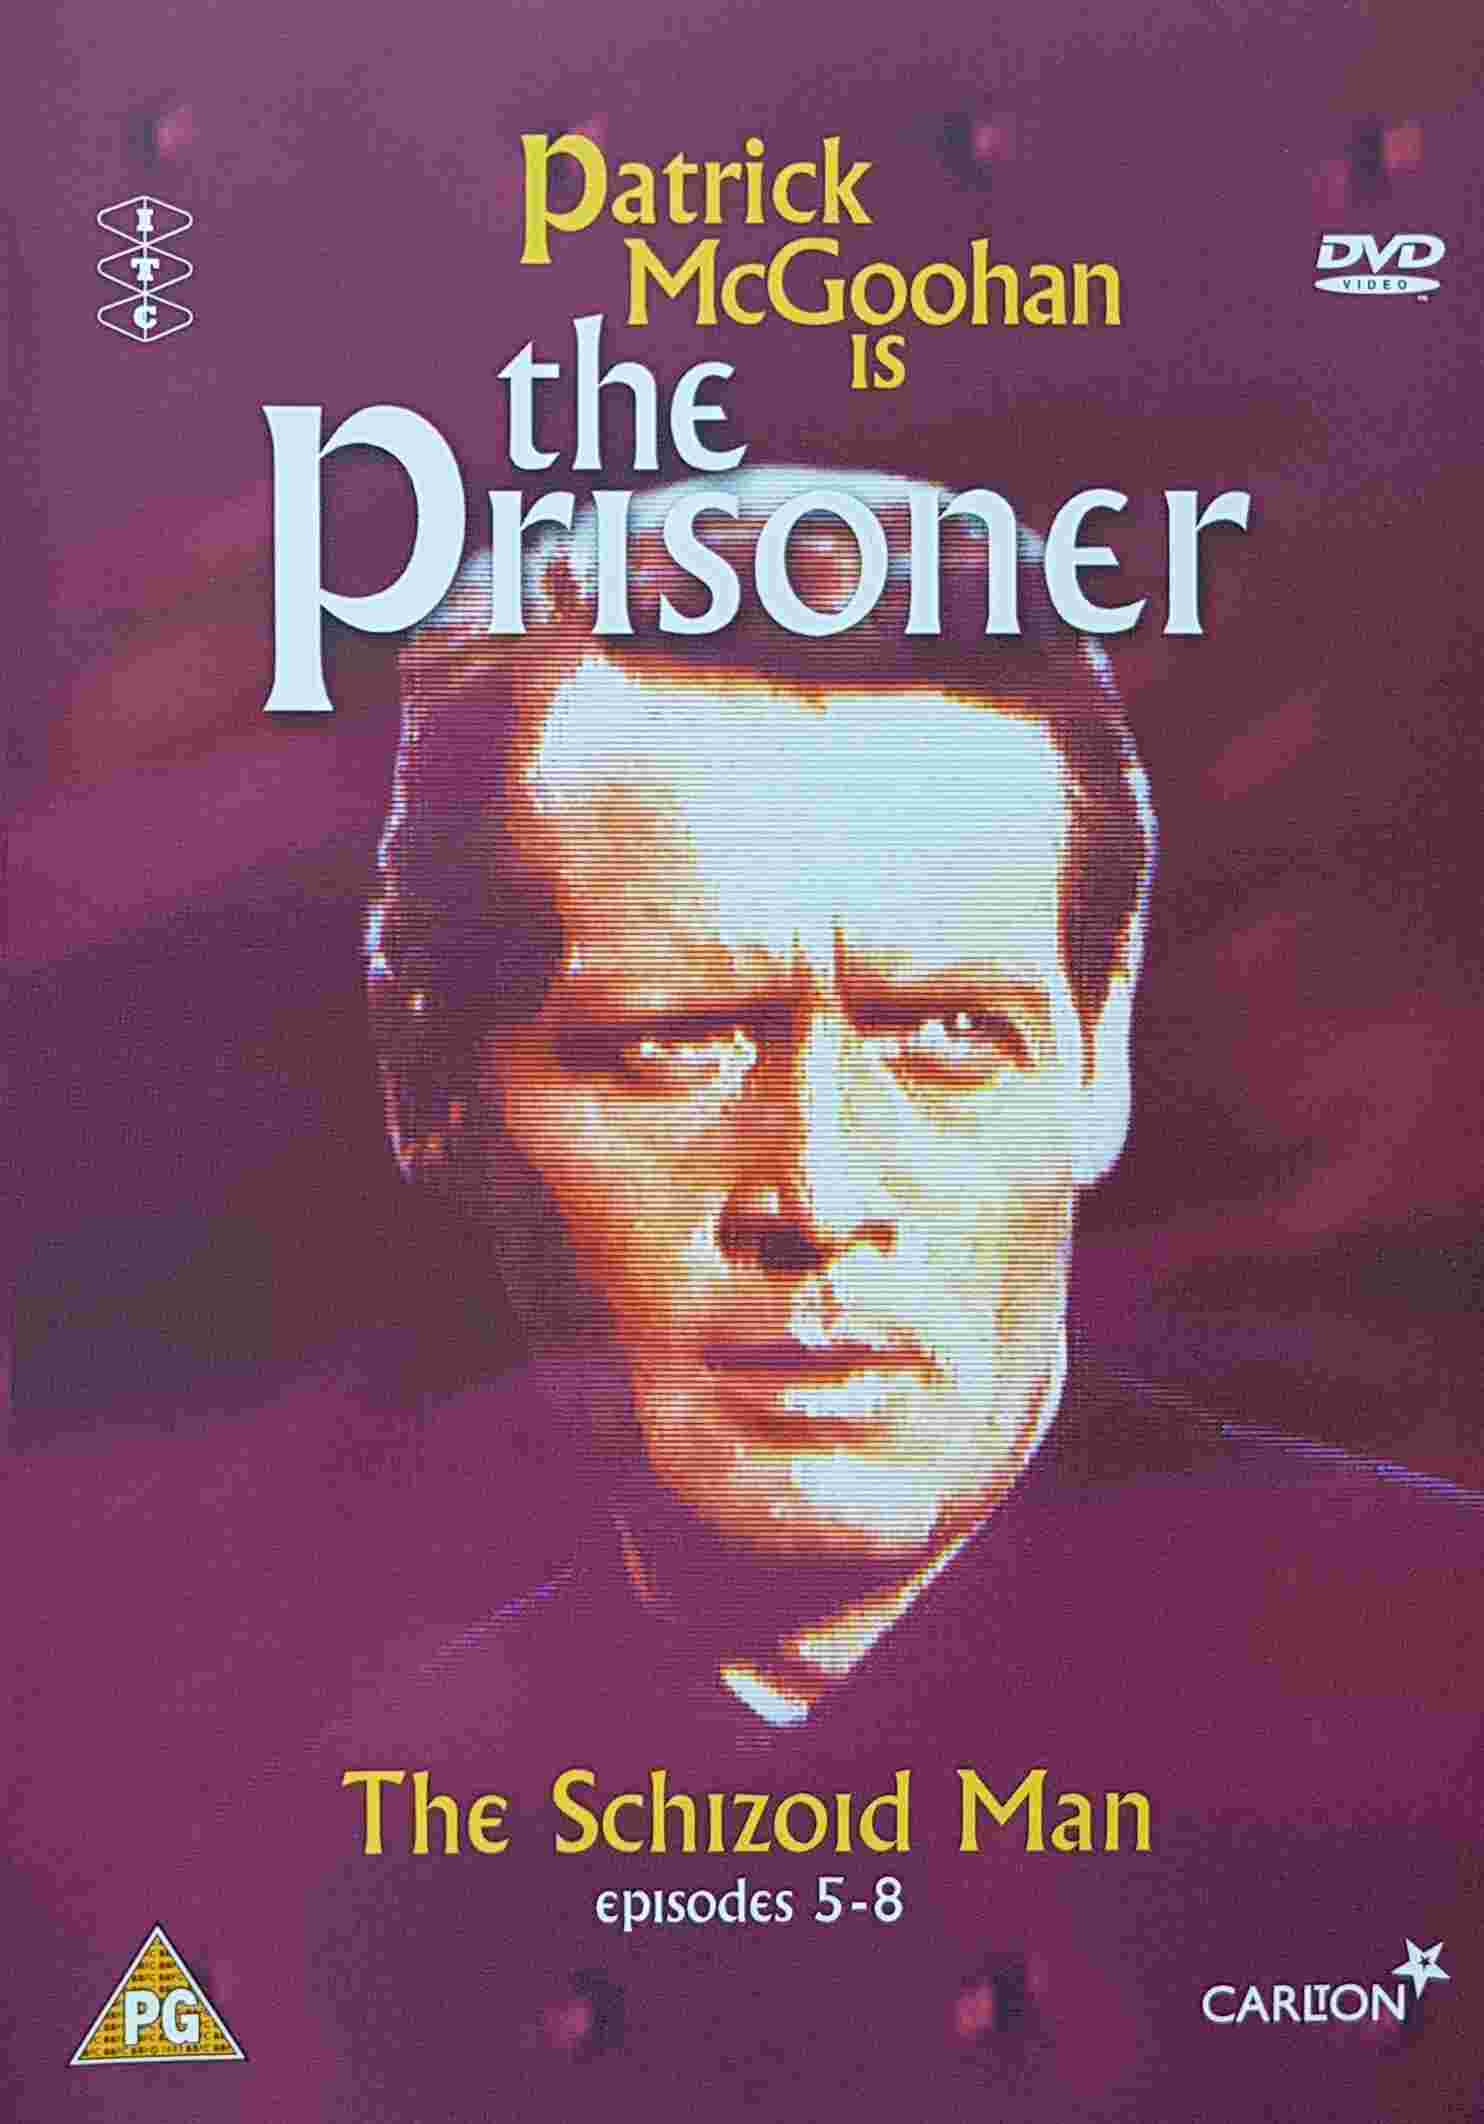 Picture of 37115 00953 The prisoner - Episodes 5 - 8 by artist Various